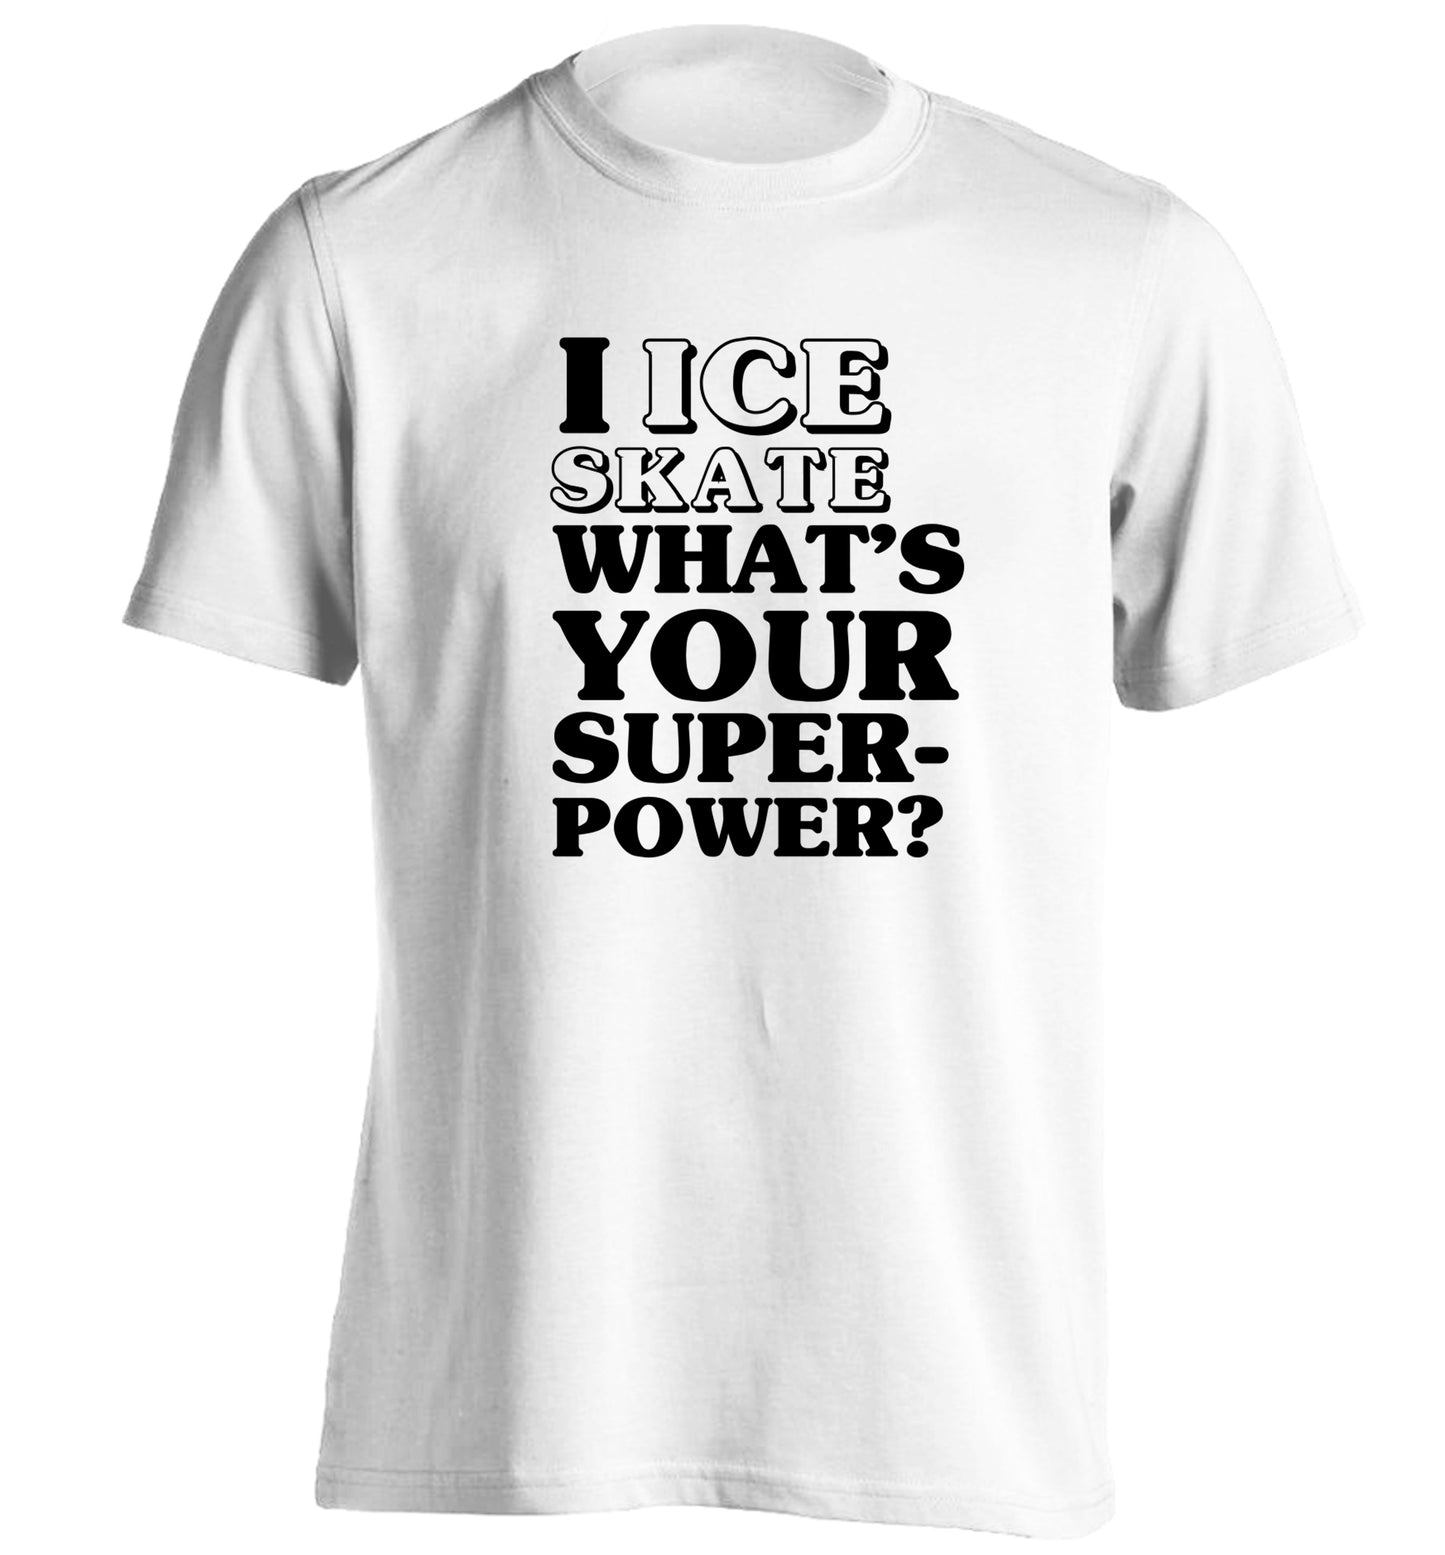 I ice skate what's your superpower? adults unisexwhite Tshirt 2XL